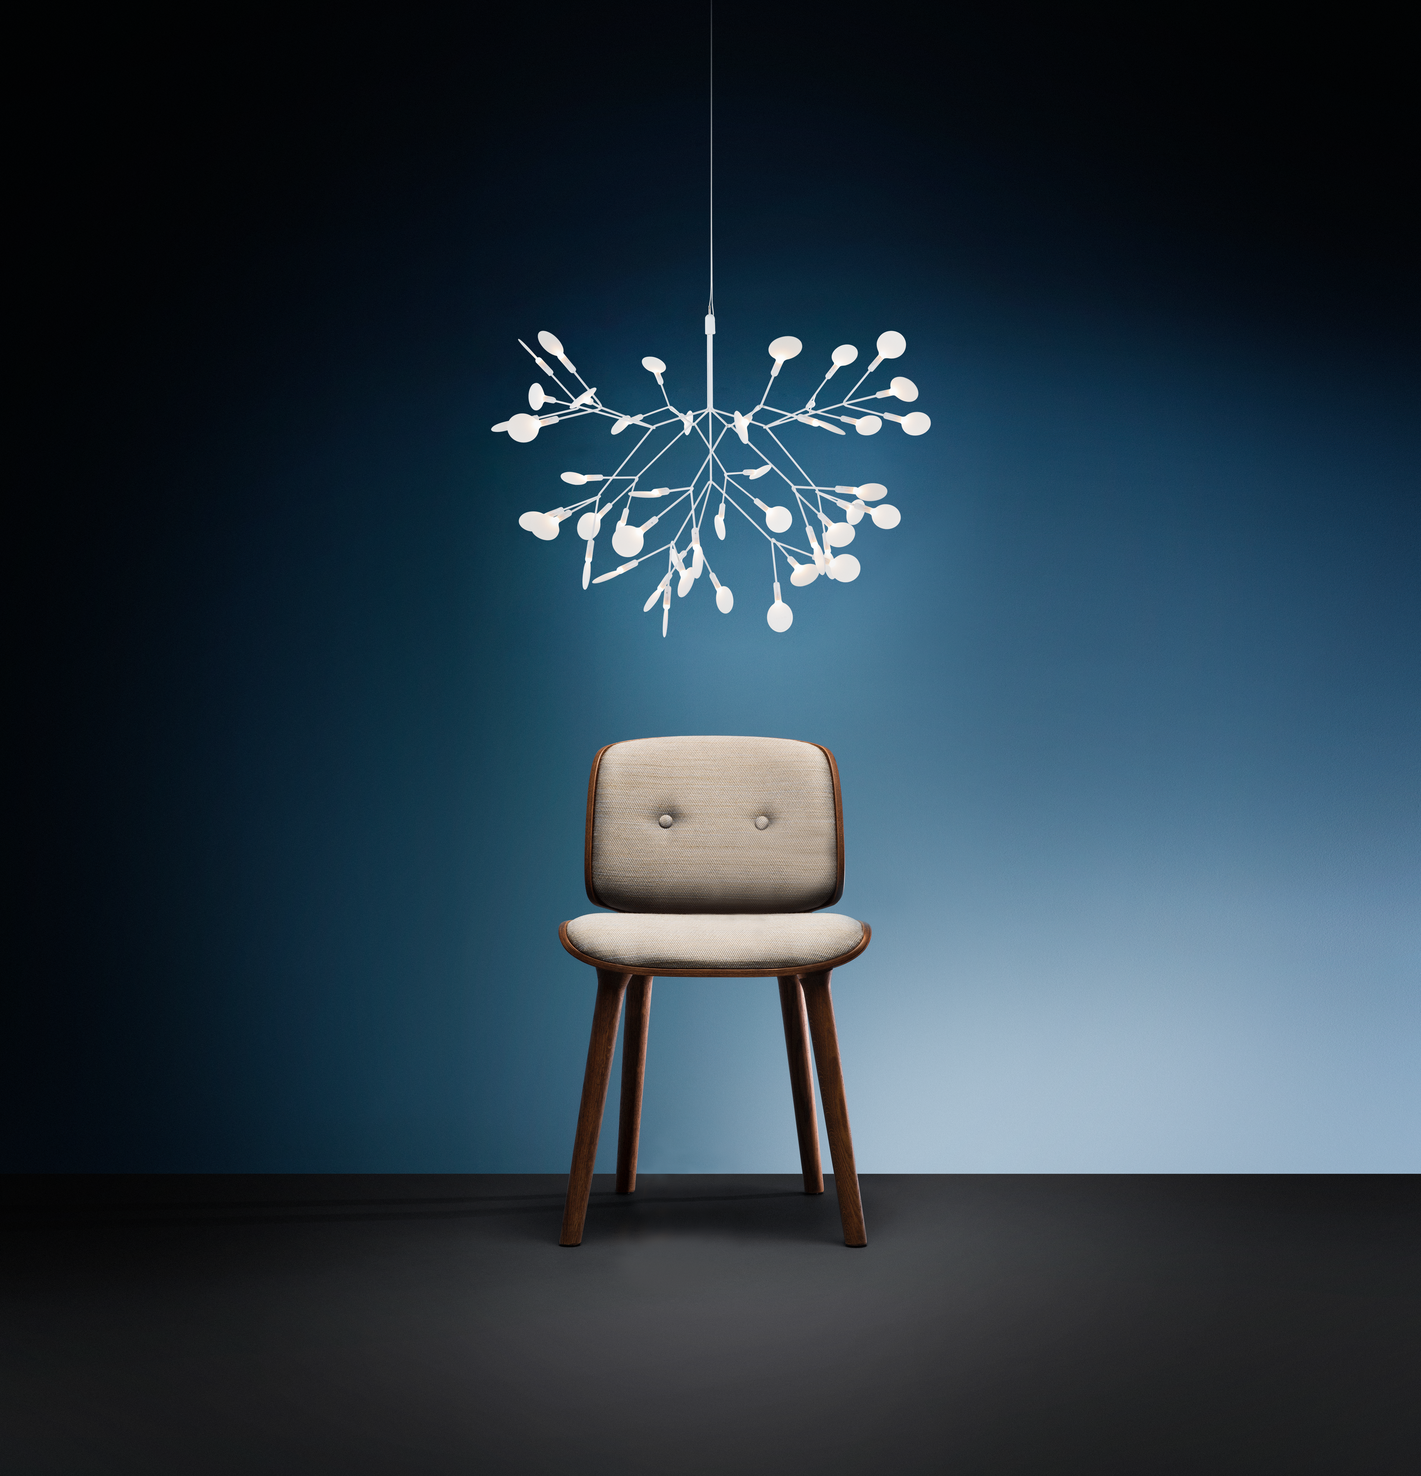 Poetic composition of Heracleum II white suspension light and Nut Dining Chair